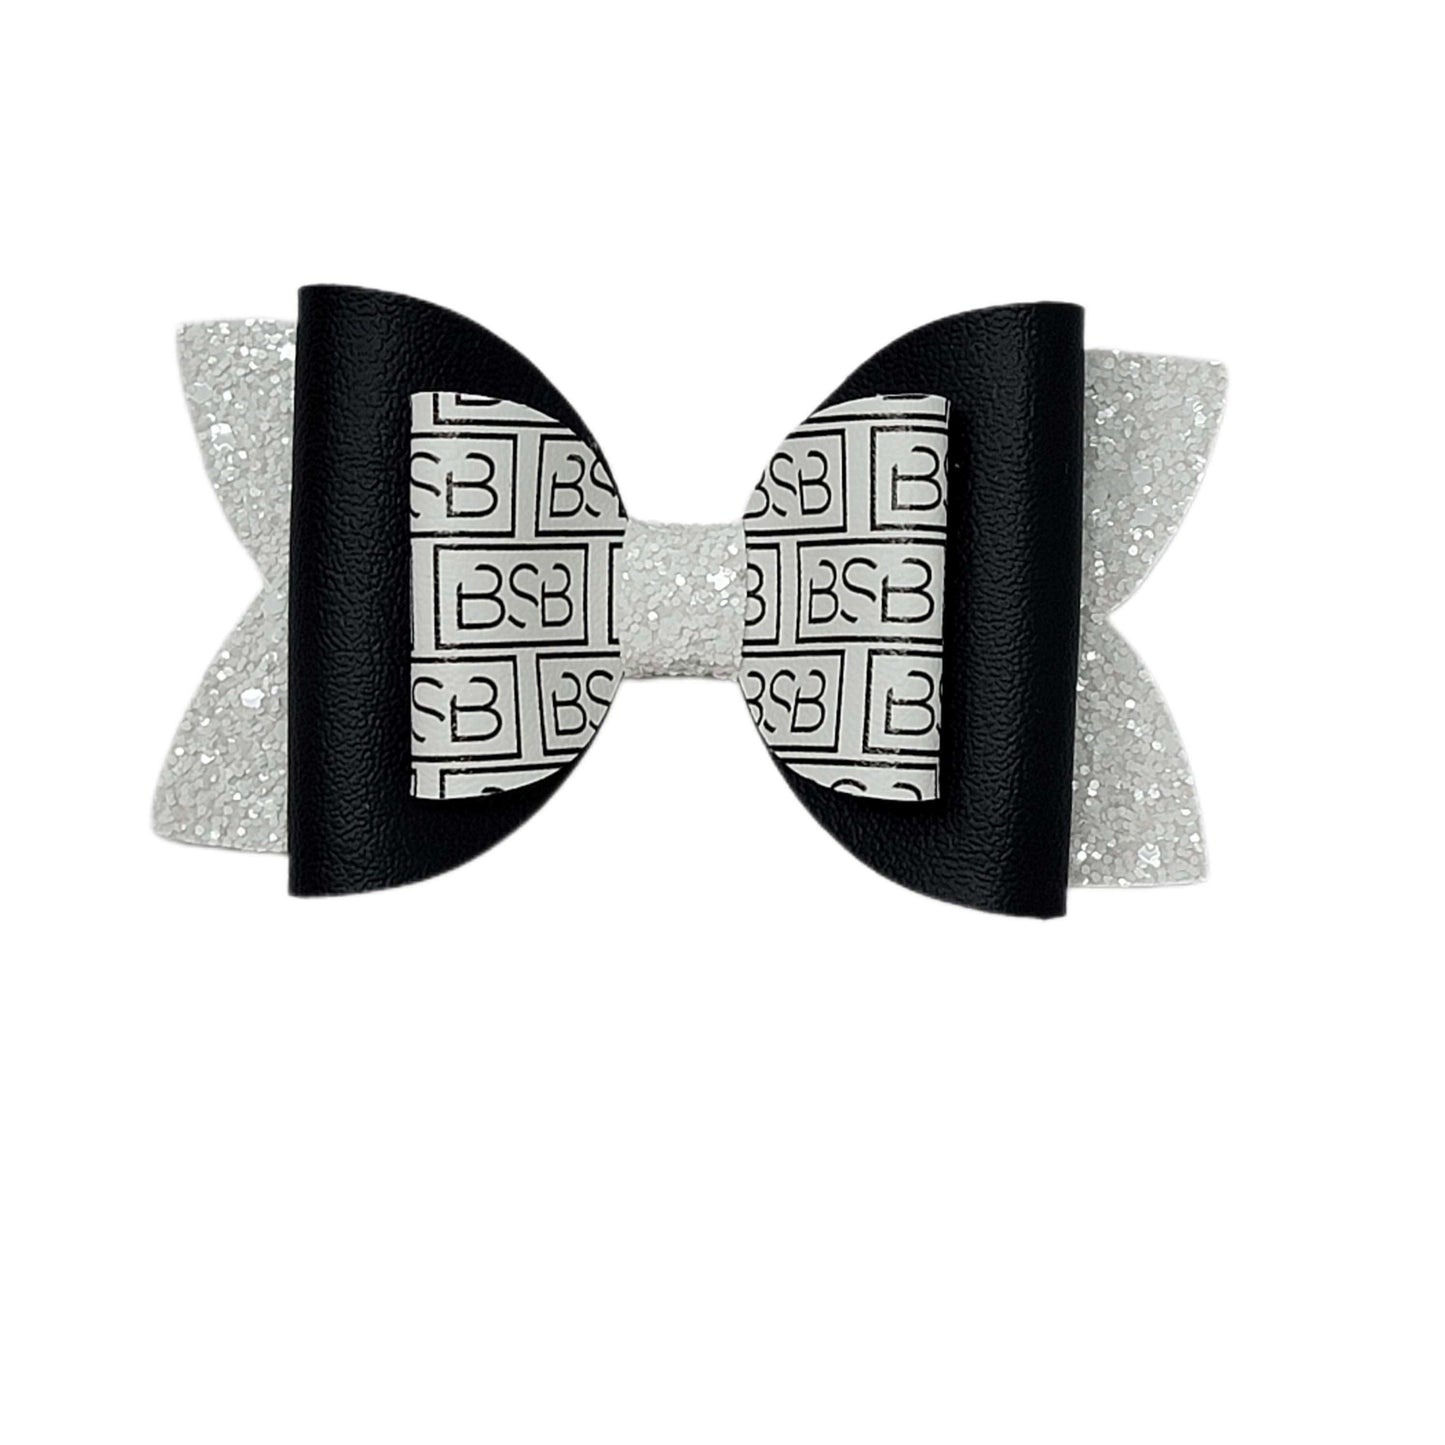 BSB Double Diva Bow 5"